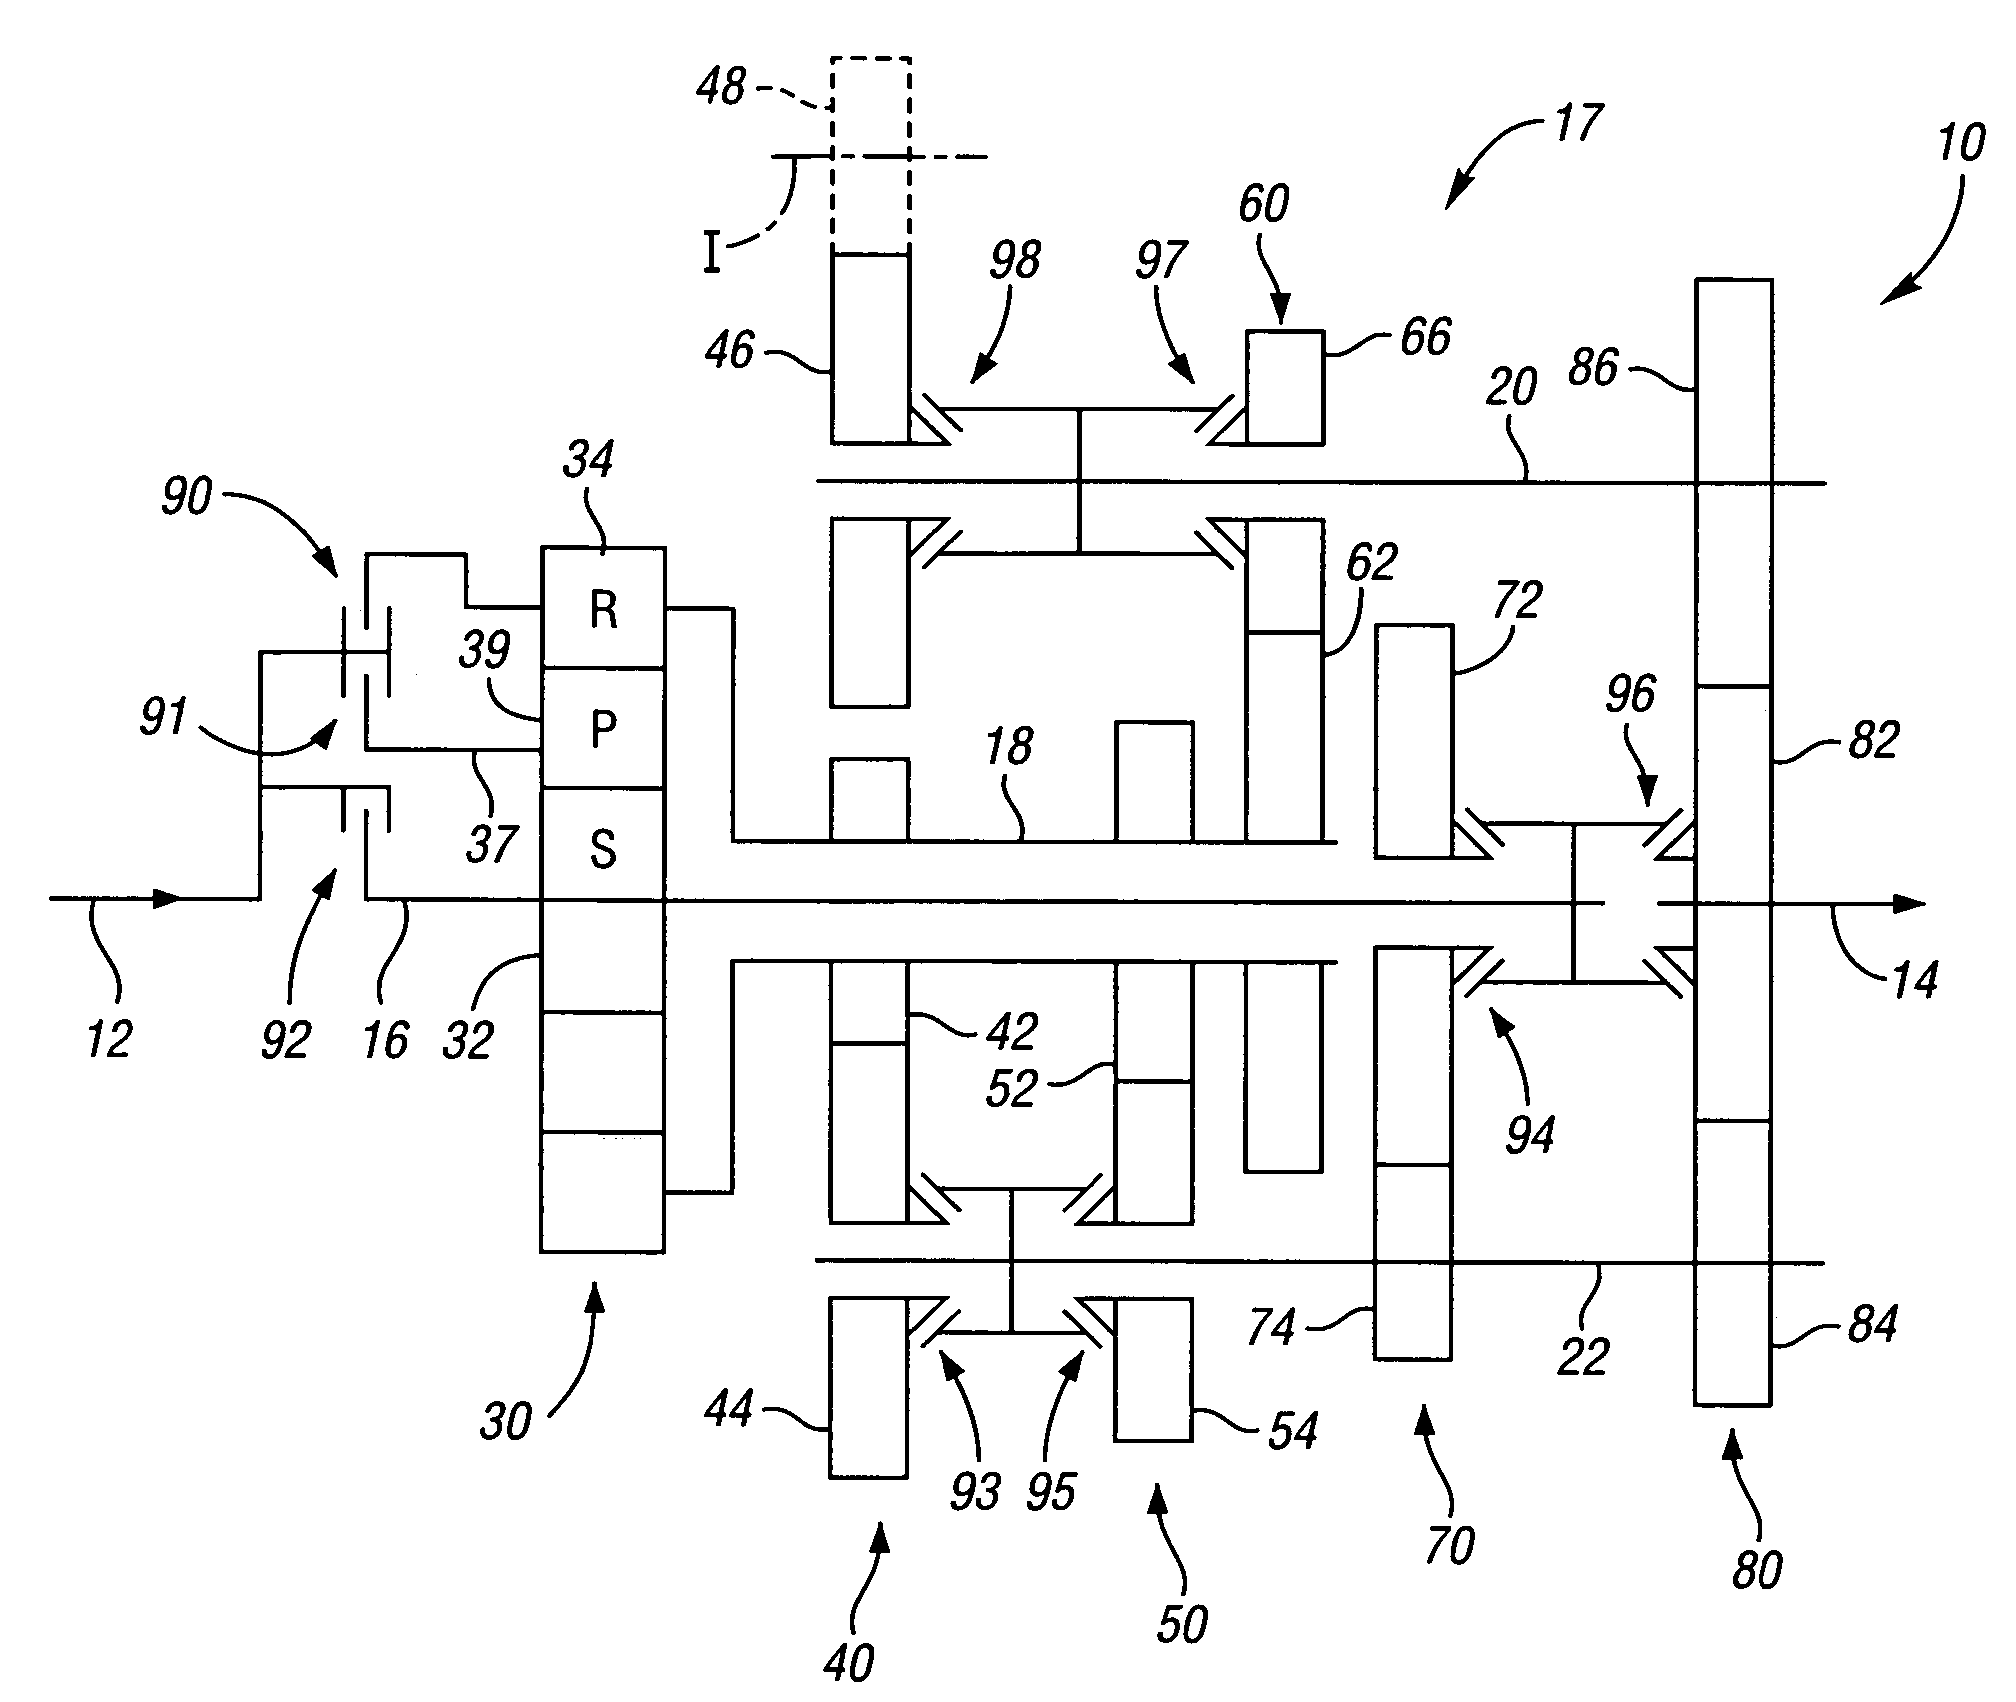 Multi-speed transmission with differential gear set and countershaft gearing